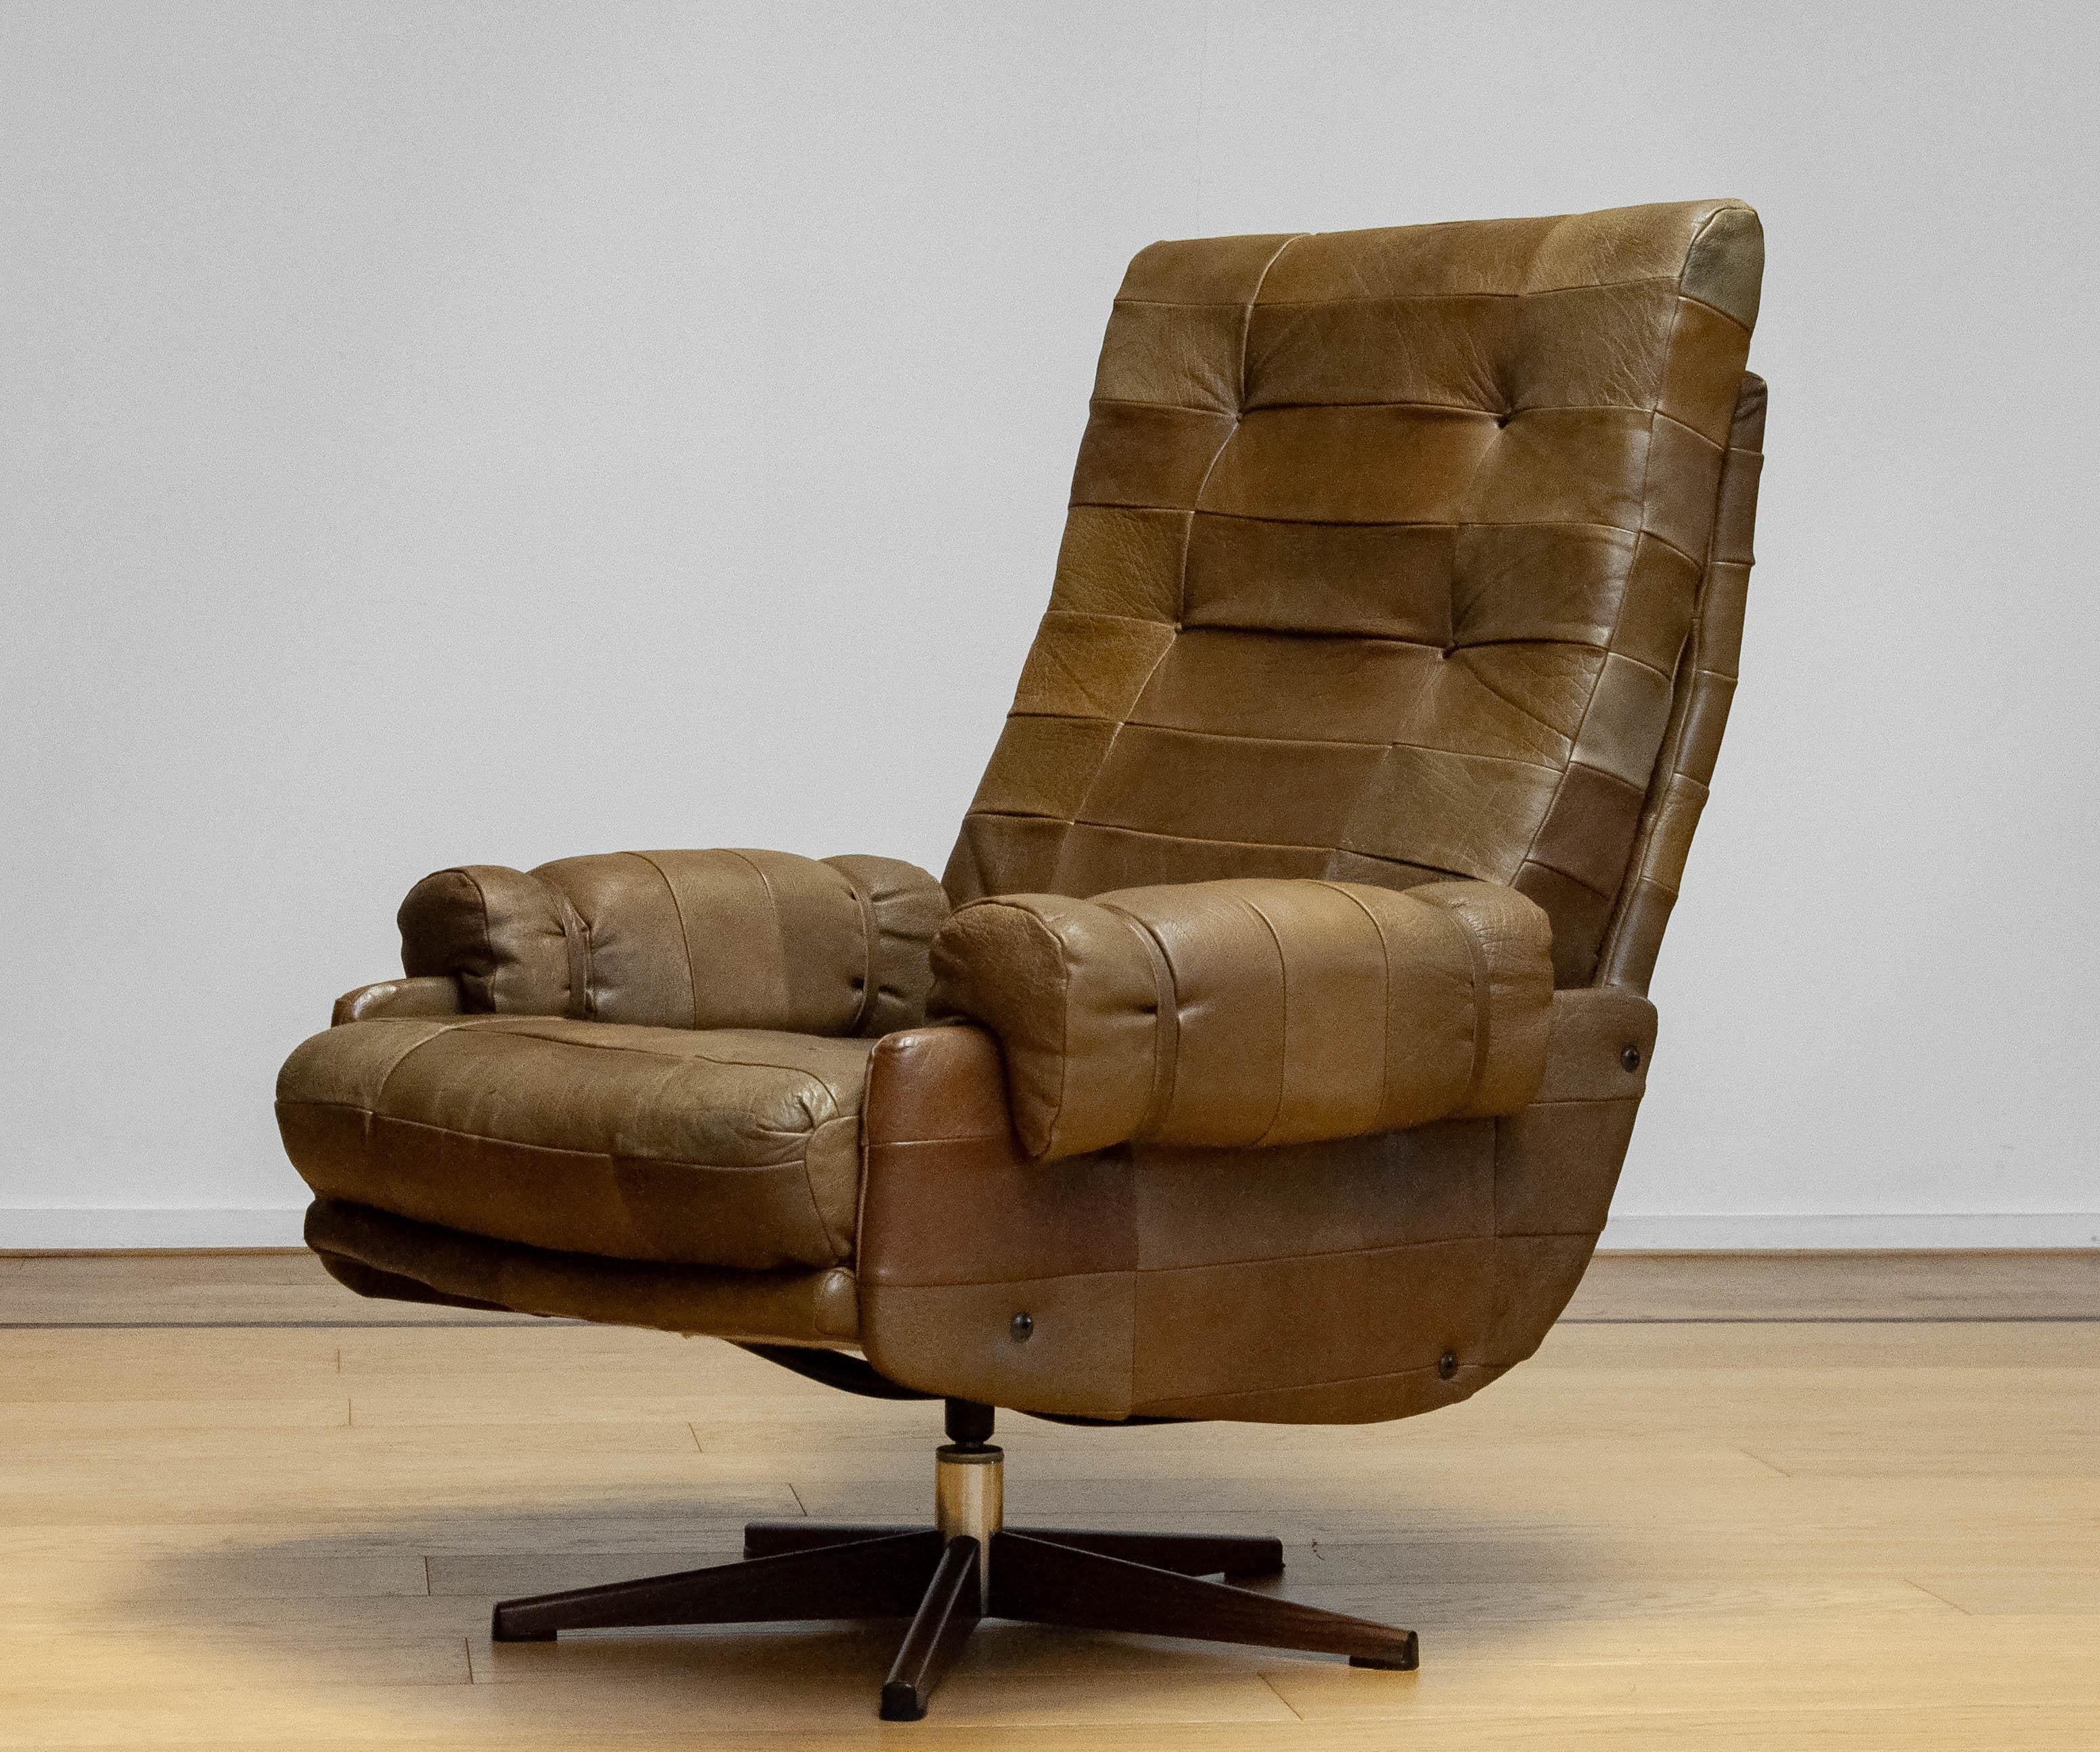 Extremely comfortable swivel chair by Arne Norell For Norell Möbler AB in Sweden. The chair is upholstered with beautiful and sturdy olive green ( patchwork ) buffalo leather. The chair supports great and is absolutely made for long seat / rest